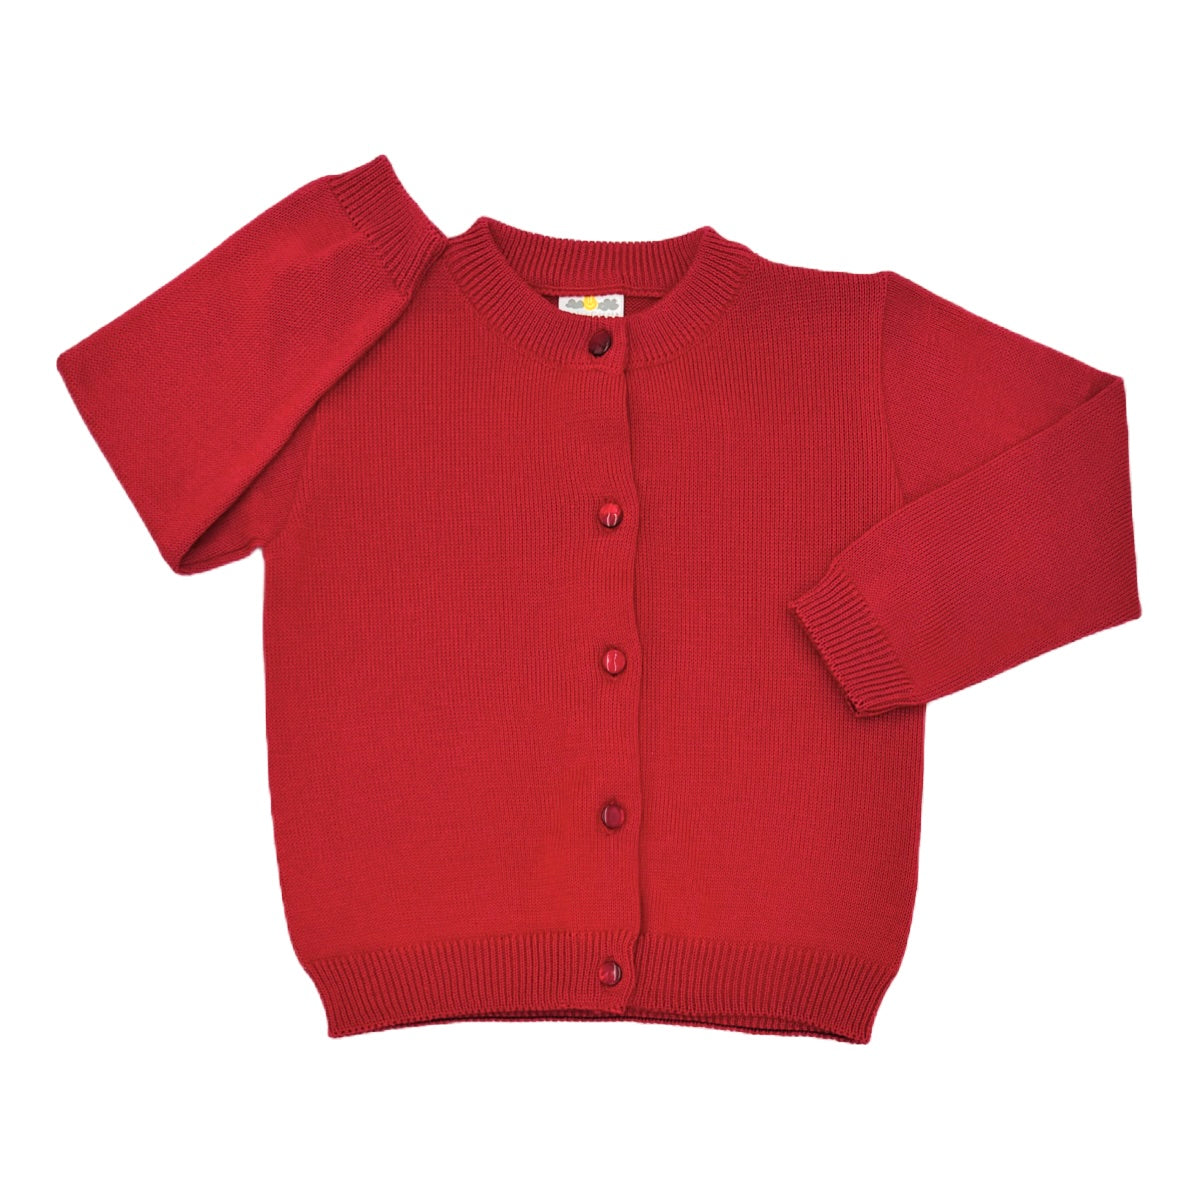 Toddler Girl's Classic Red Cardigan Sweater 